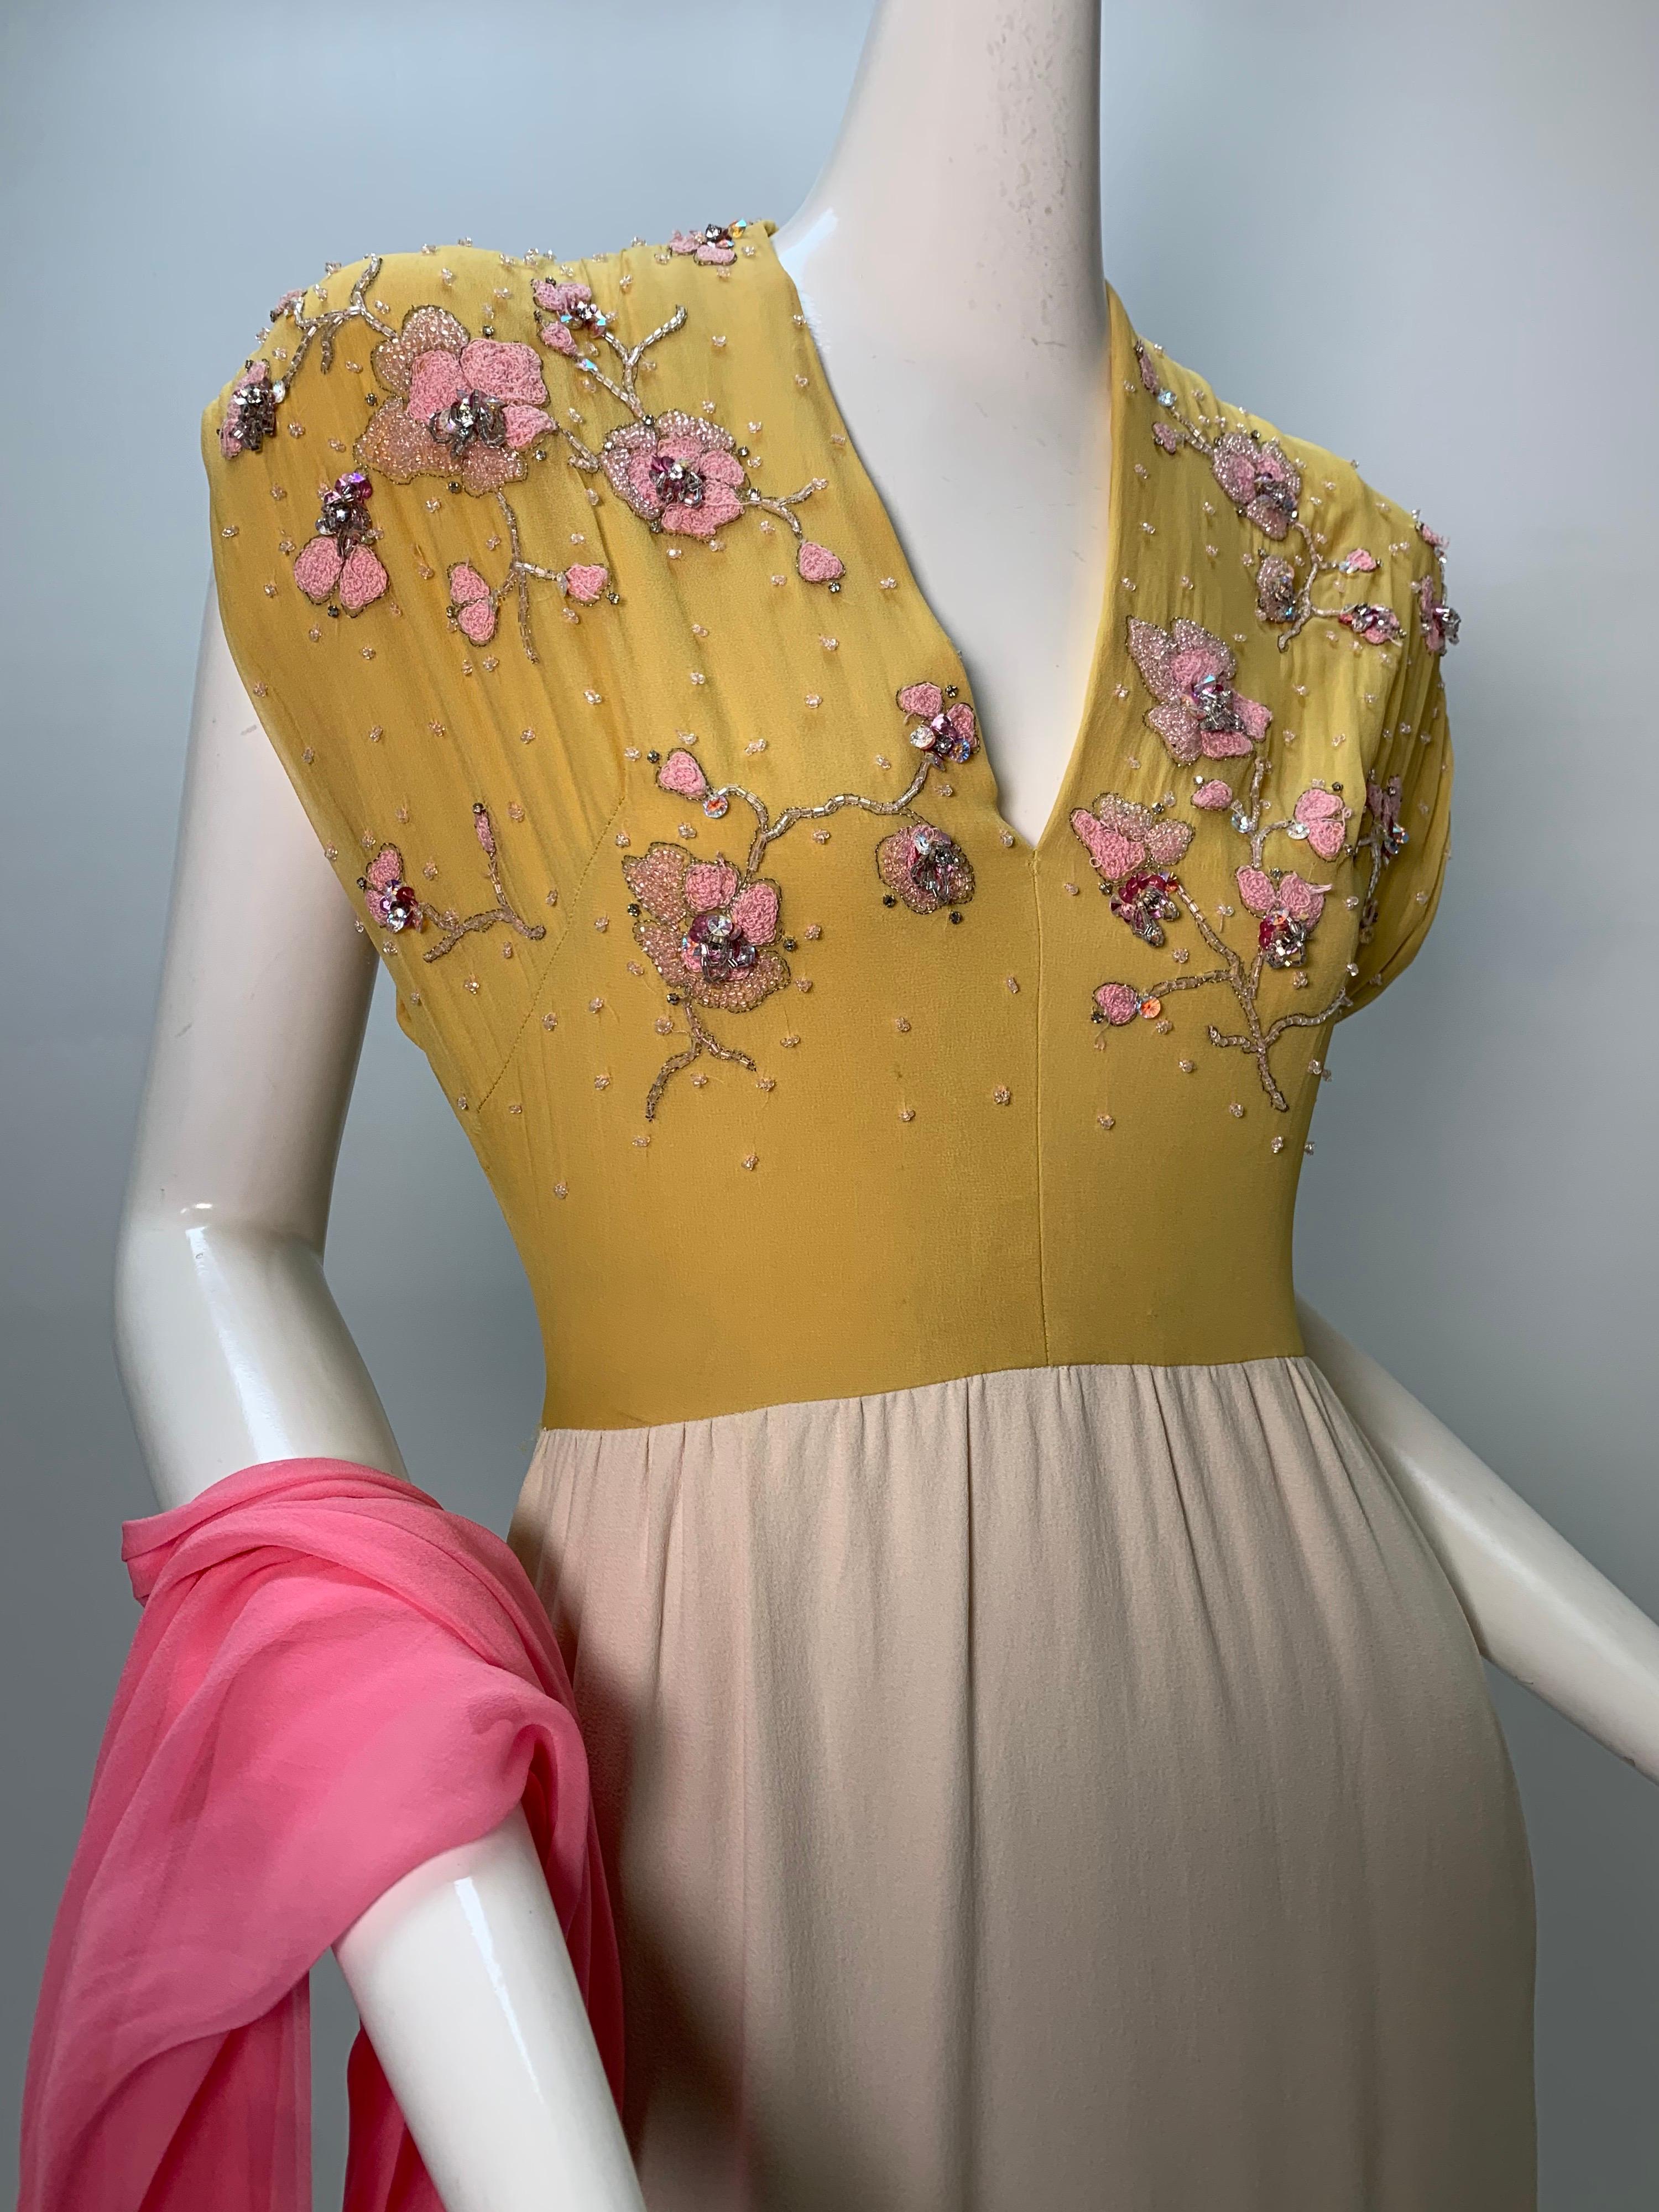 1960s John Hogan Crepe Dress w/ Mustard Floral Embroidered Bodice & Cream Skirt In Good Condition For Sale In Gresham, OR